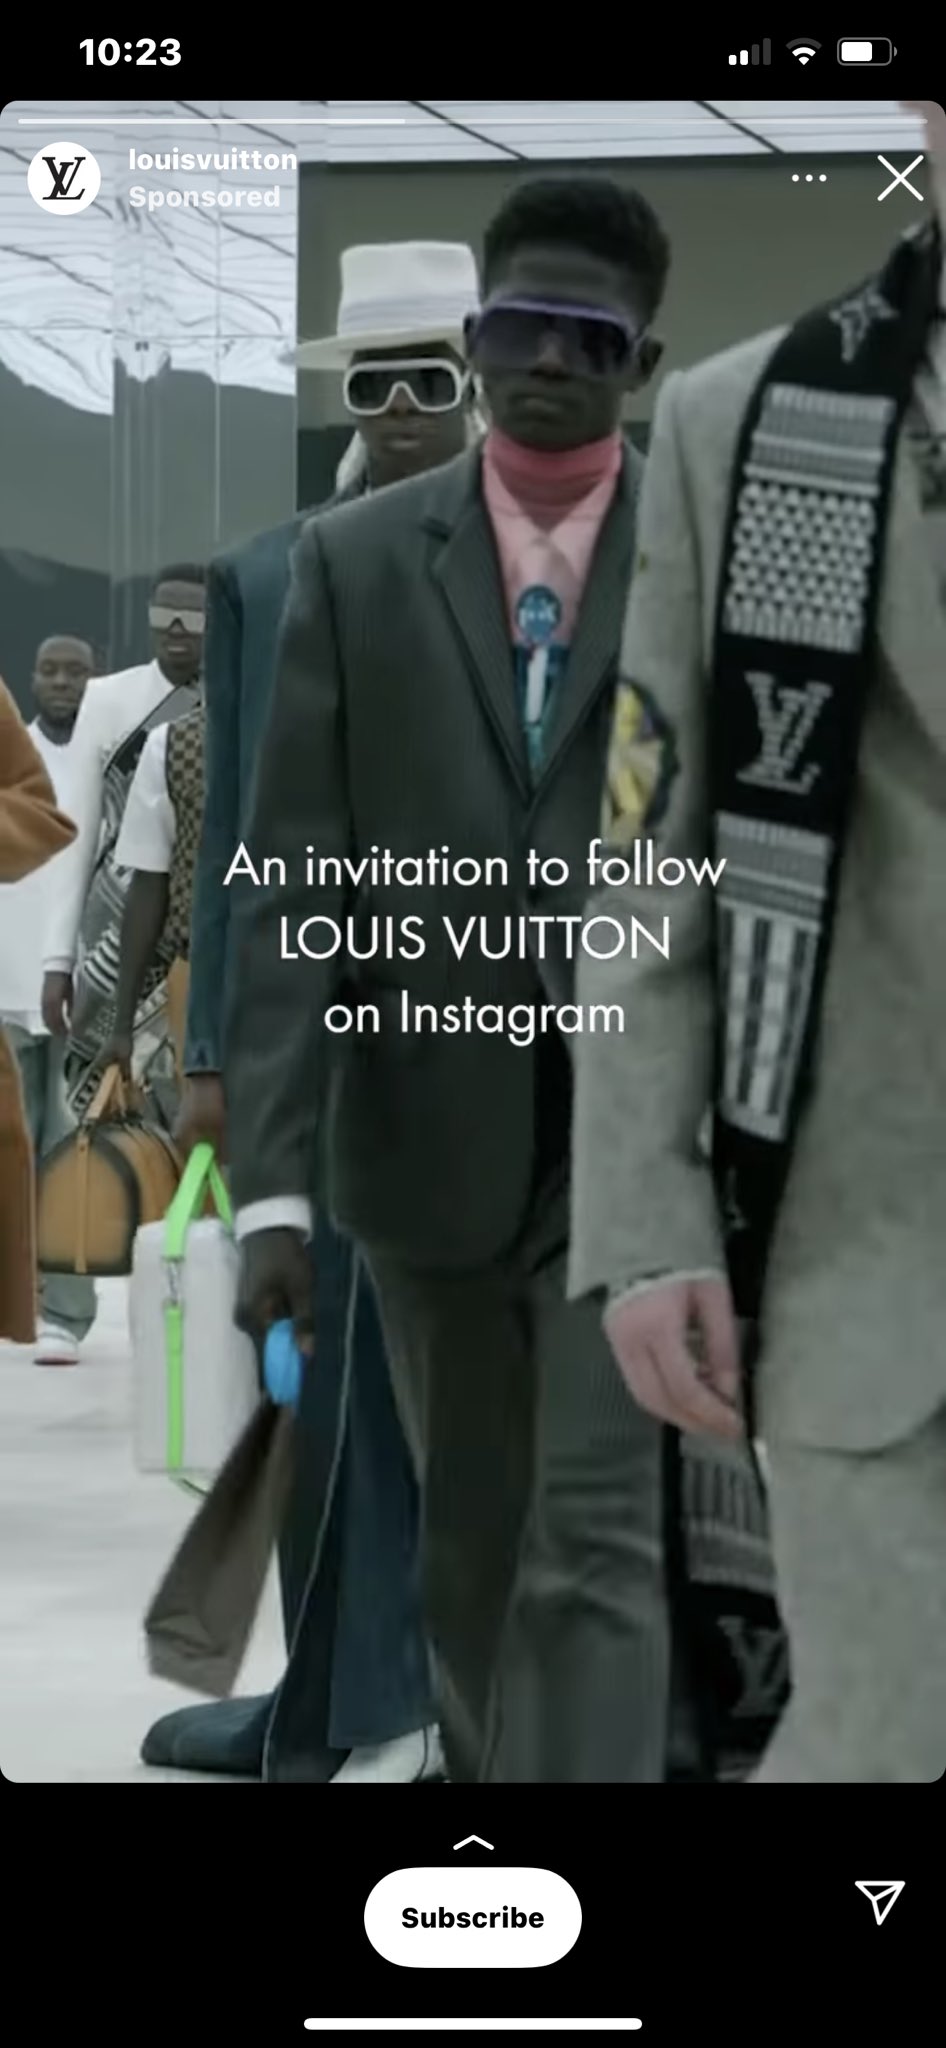 AP on X: Every time I've seen this LV ad on Instagram it blows my mind.  Asin “invitation to follow Louis Vuitton” It's a privilege 🤣😂   / X